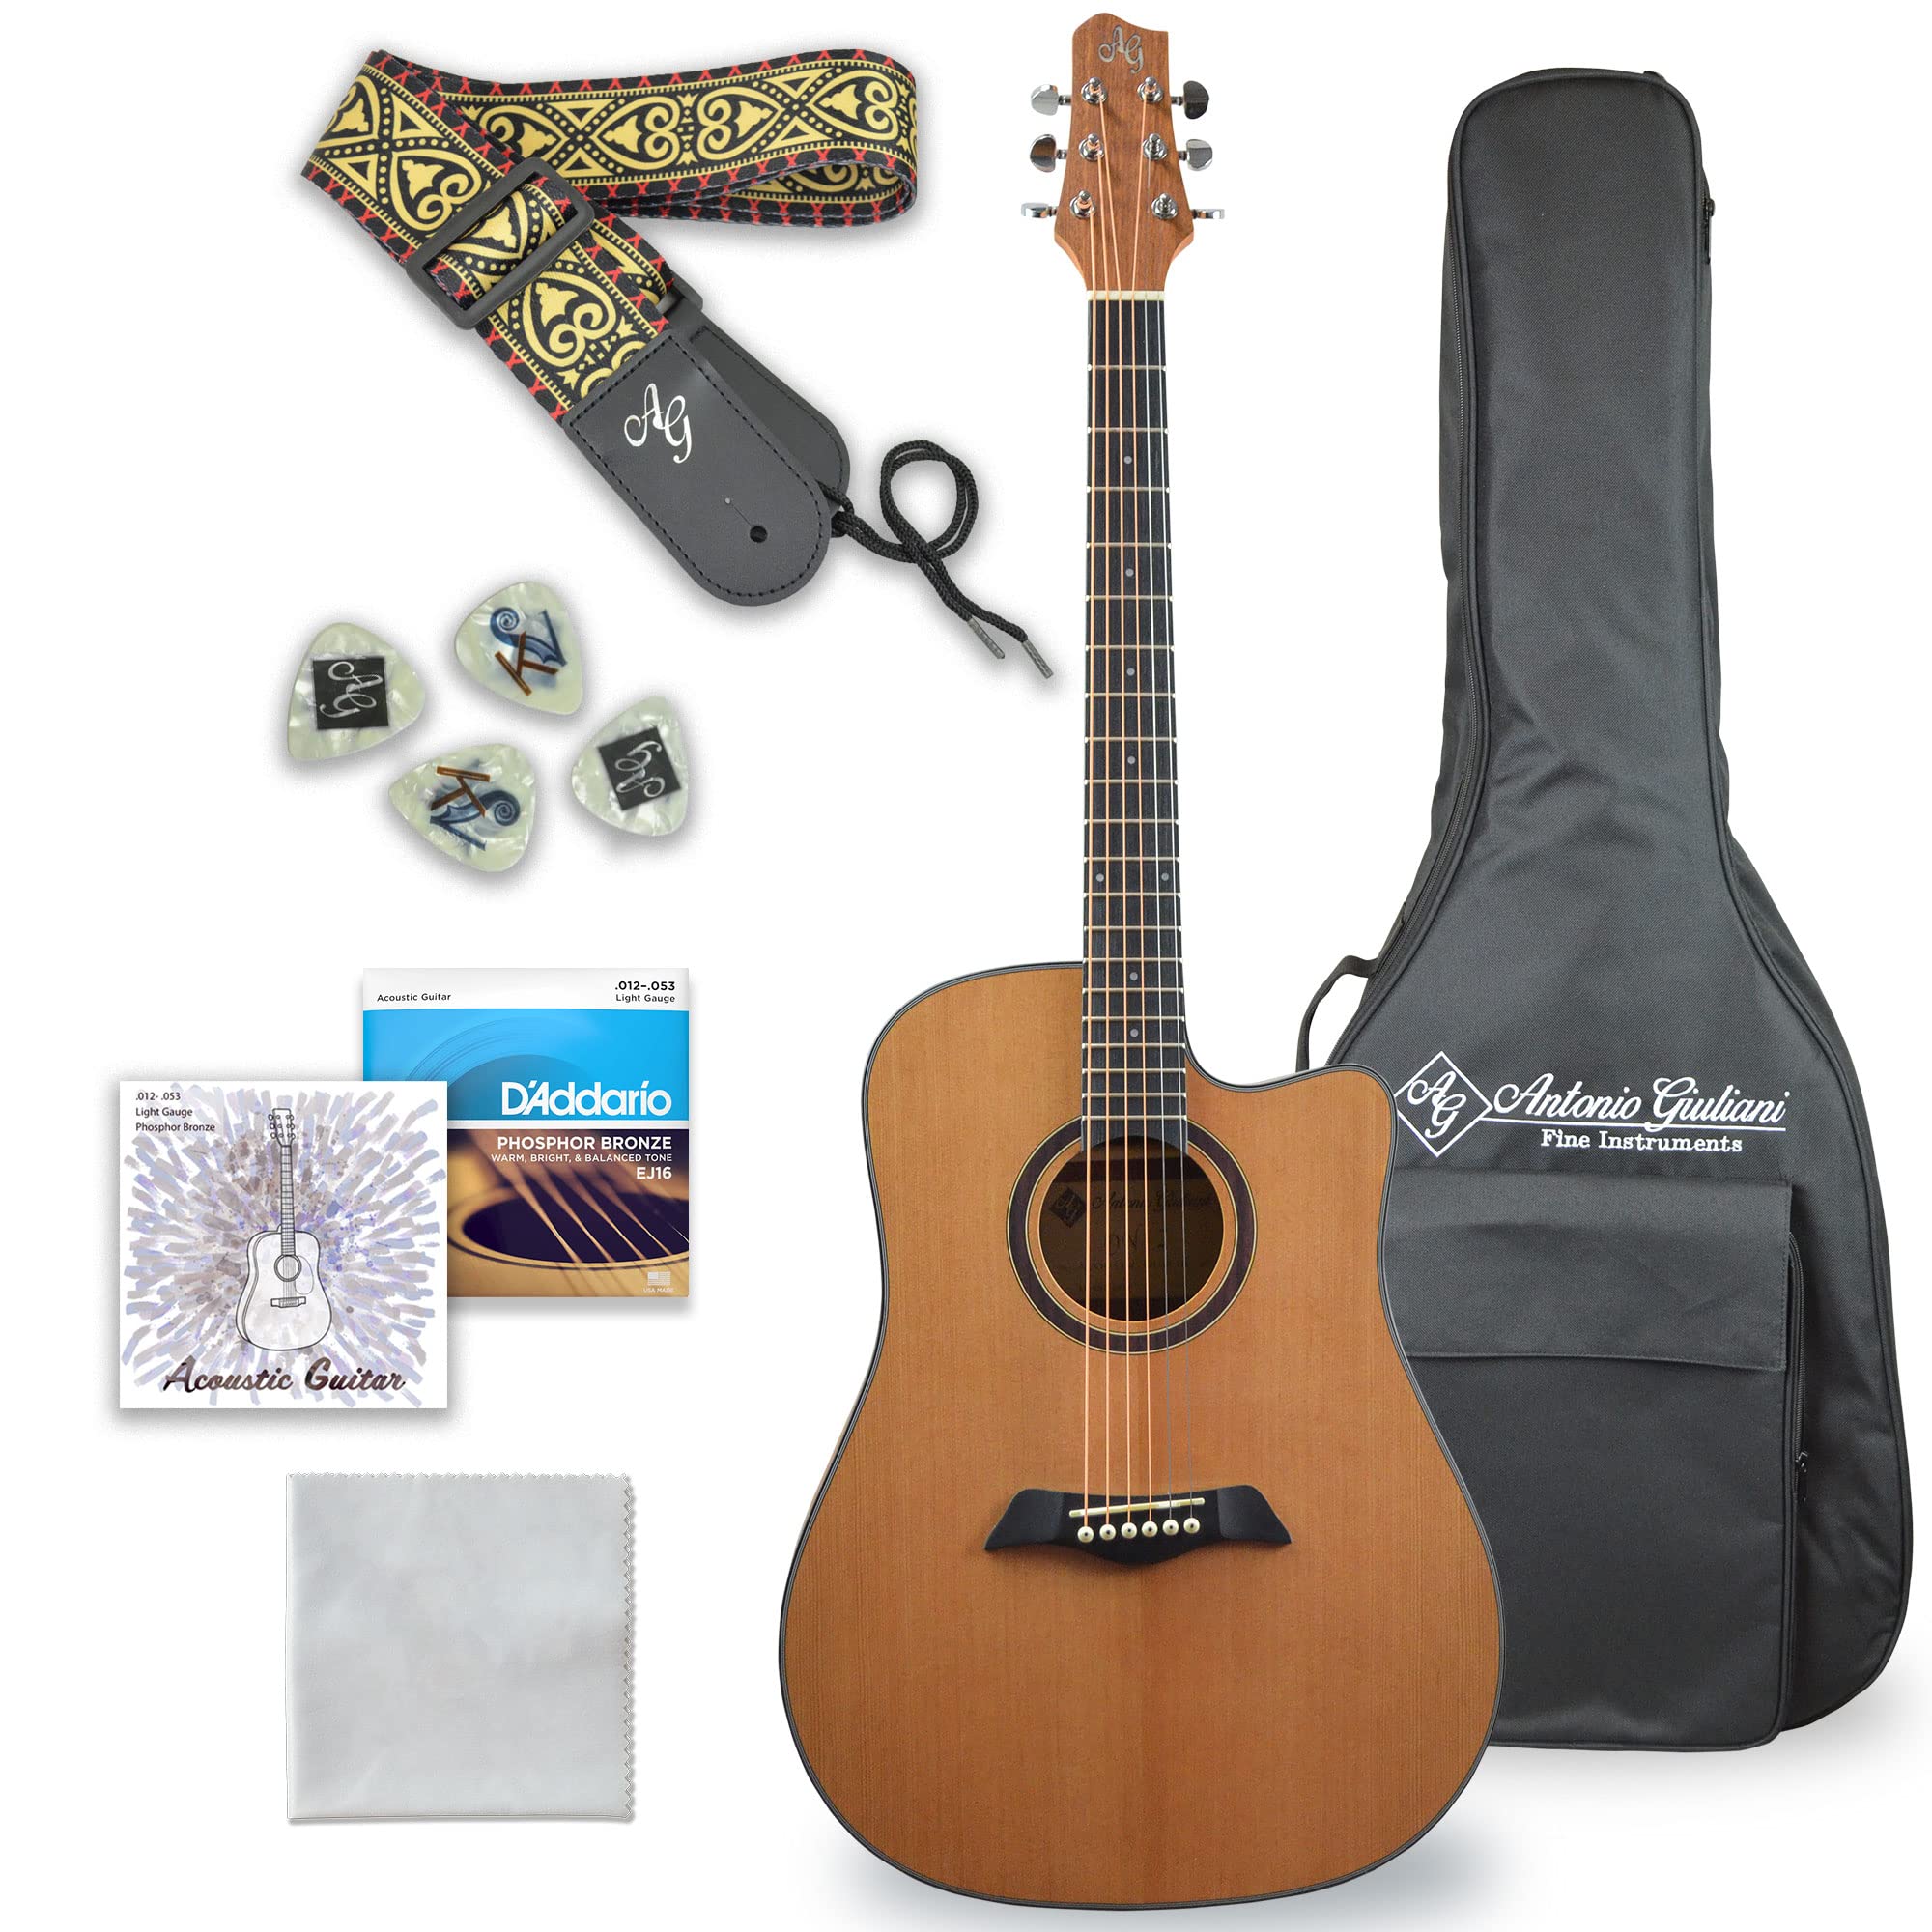 Kennedy Violins Antonio Giuliani Acoustic Guitar (Clear) Bundle (Dn-2) - Dreadnought Guitar With Case, Strap, Strings And Accessories